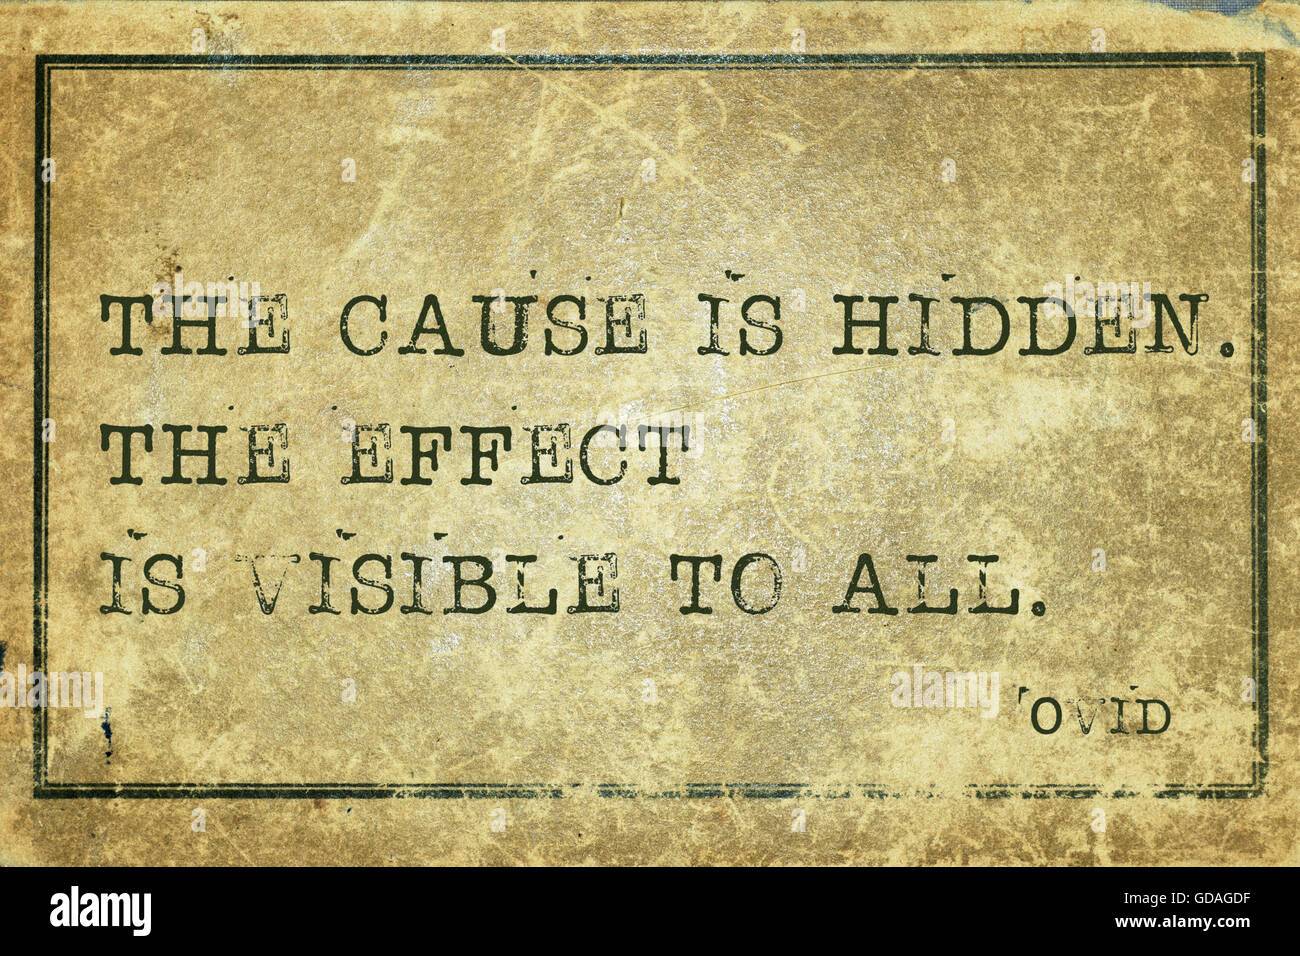 The cause is hidden - ancient Roman poet Ovid quote printed on grunge vintage cardboard Stock Photo